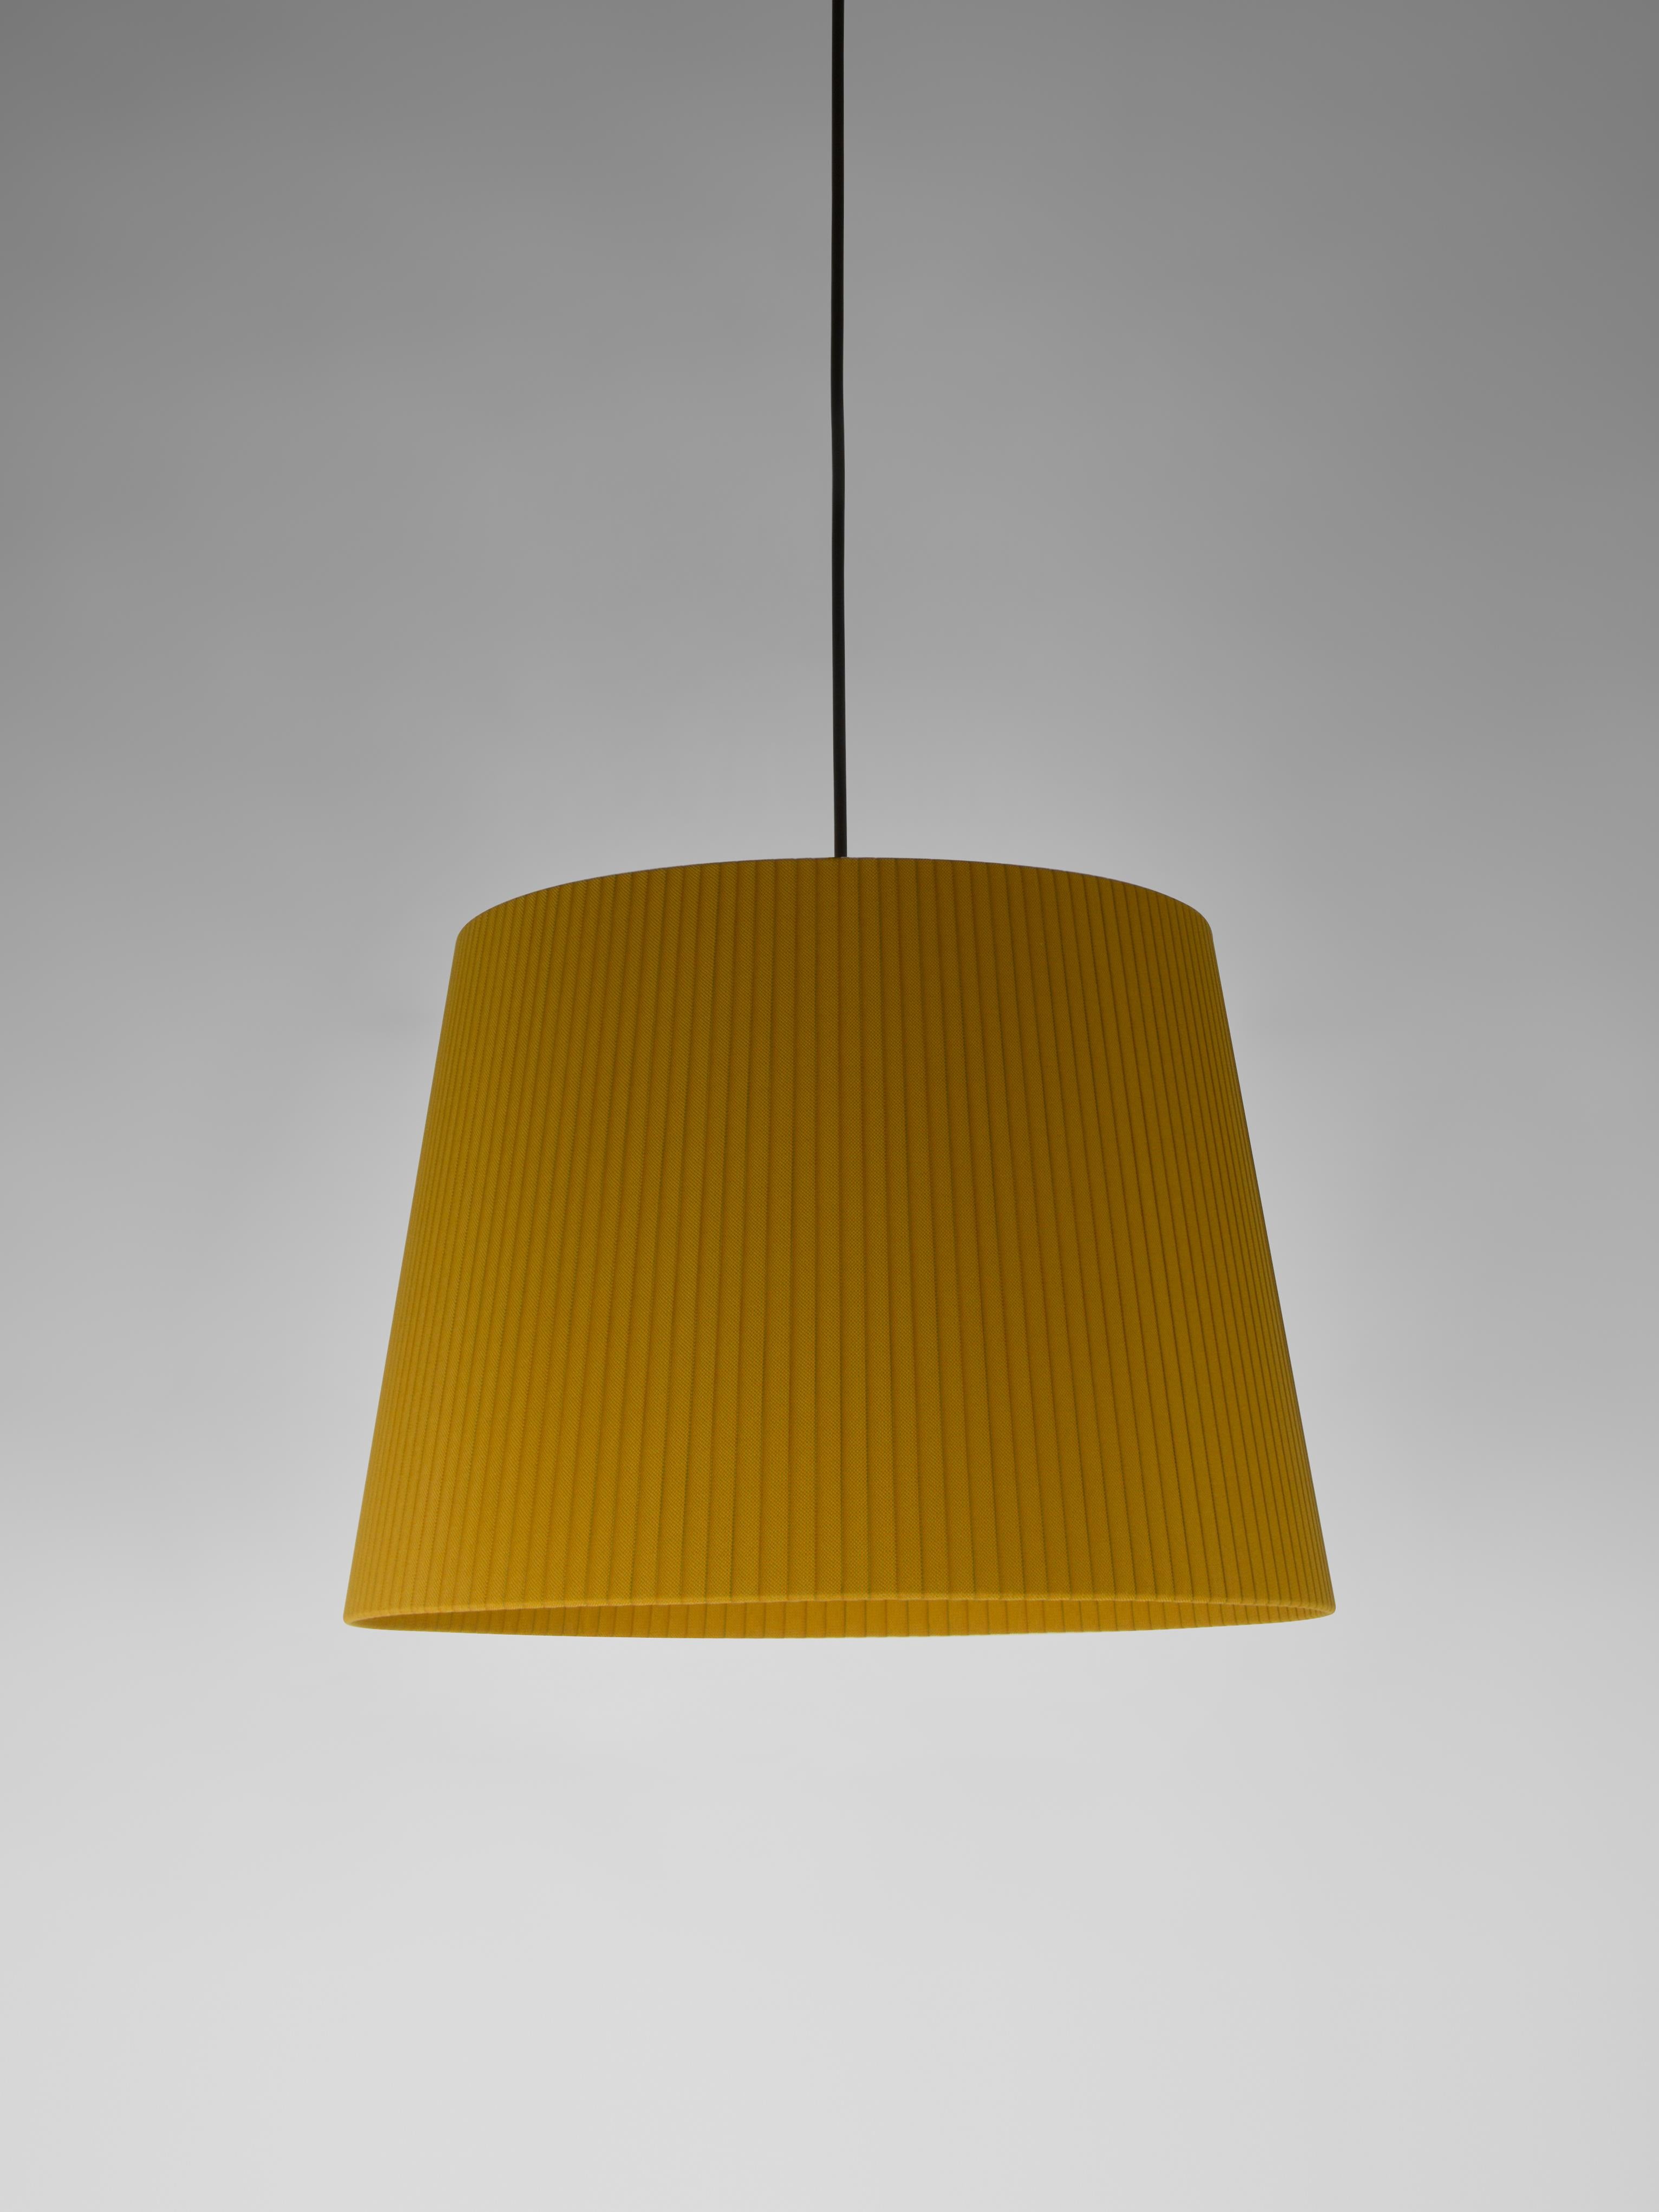 Mustard Sísísí Cónicas GT1 pendant lamp by Santa & Cole
Dimensions: D 45 x H 32 cm
Materials: Metal, ribbon.
Available in other colors.
Also available in two lights version.

The conical shape group has multiple finishes and sizes. It consists